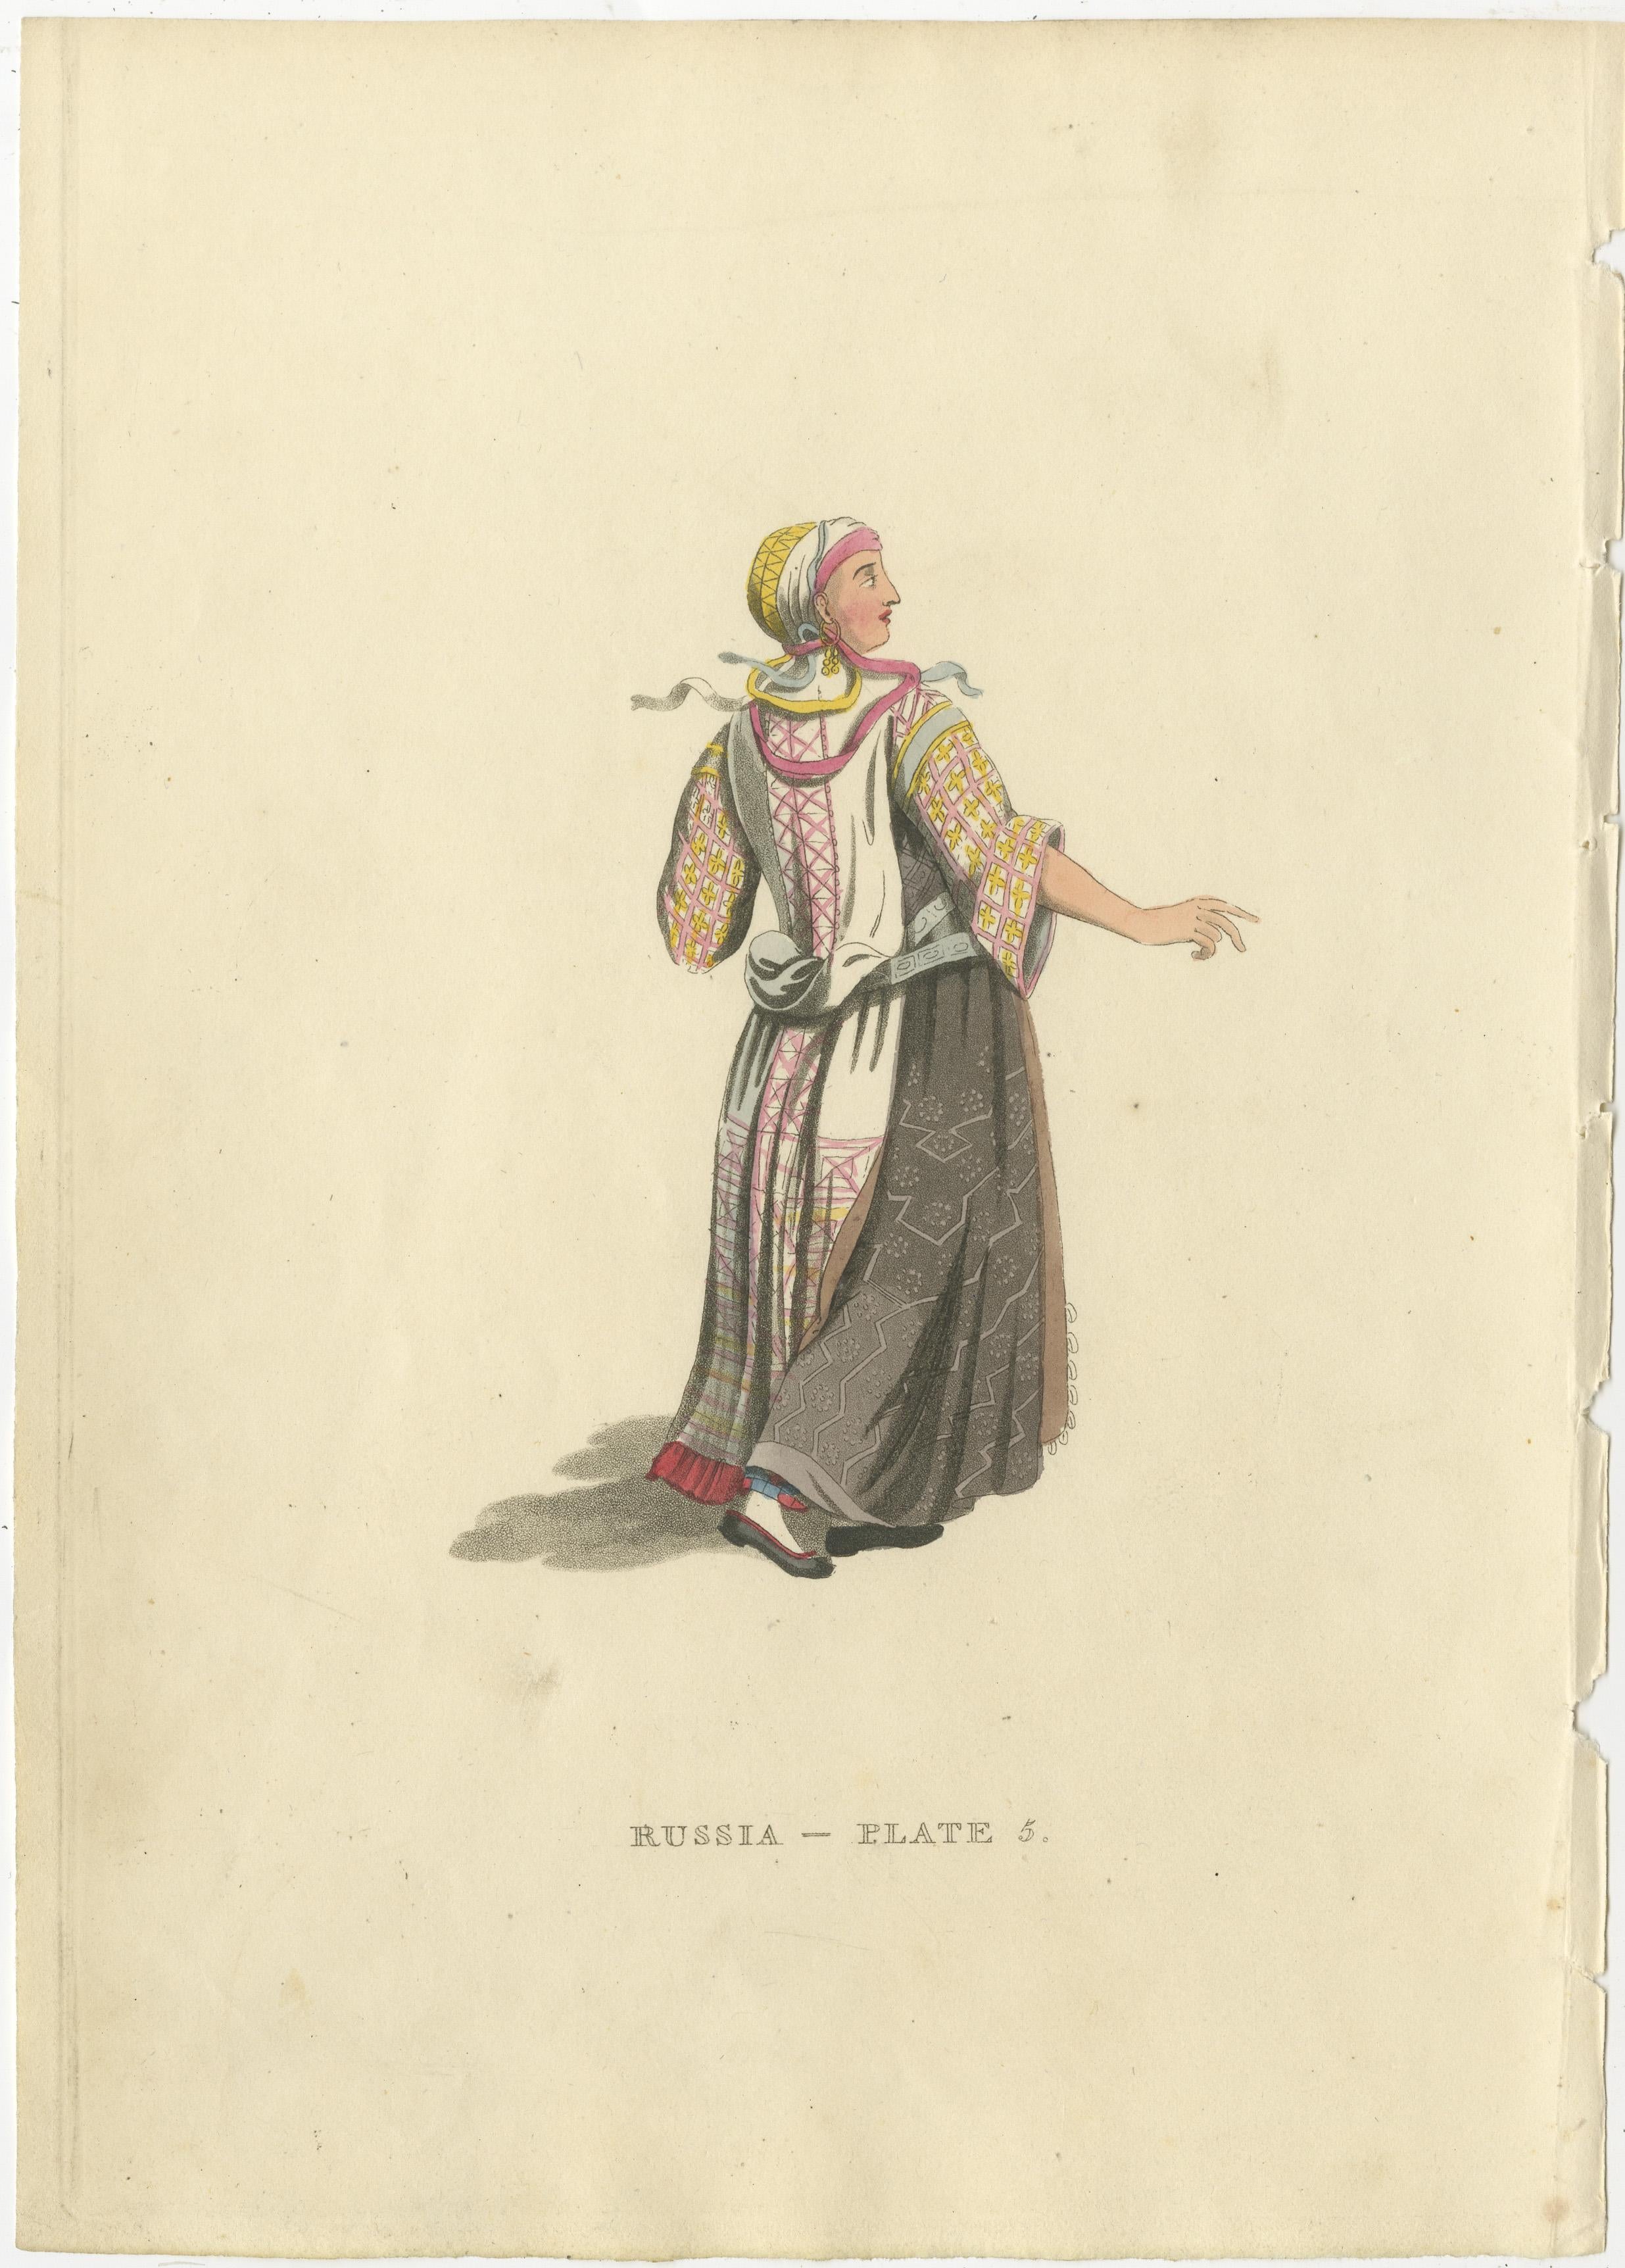 The engravings are a rich visual documentation of the cultural attire and customs from different regions within or associated with the Russian Empire in the early 19th century. William Alexander's 